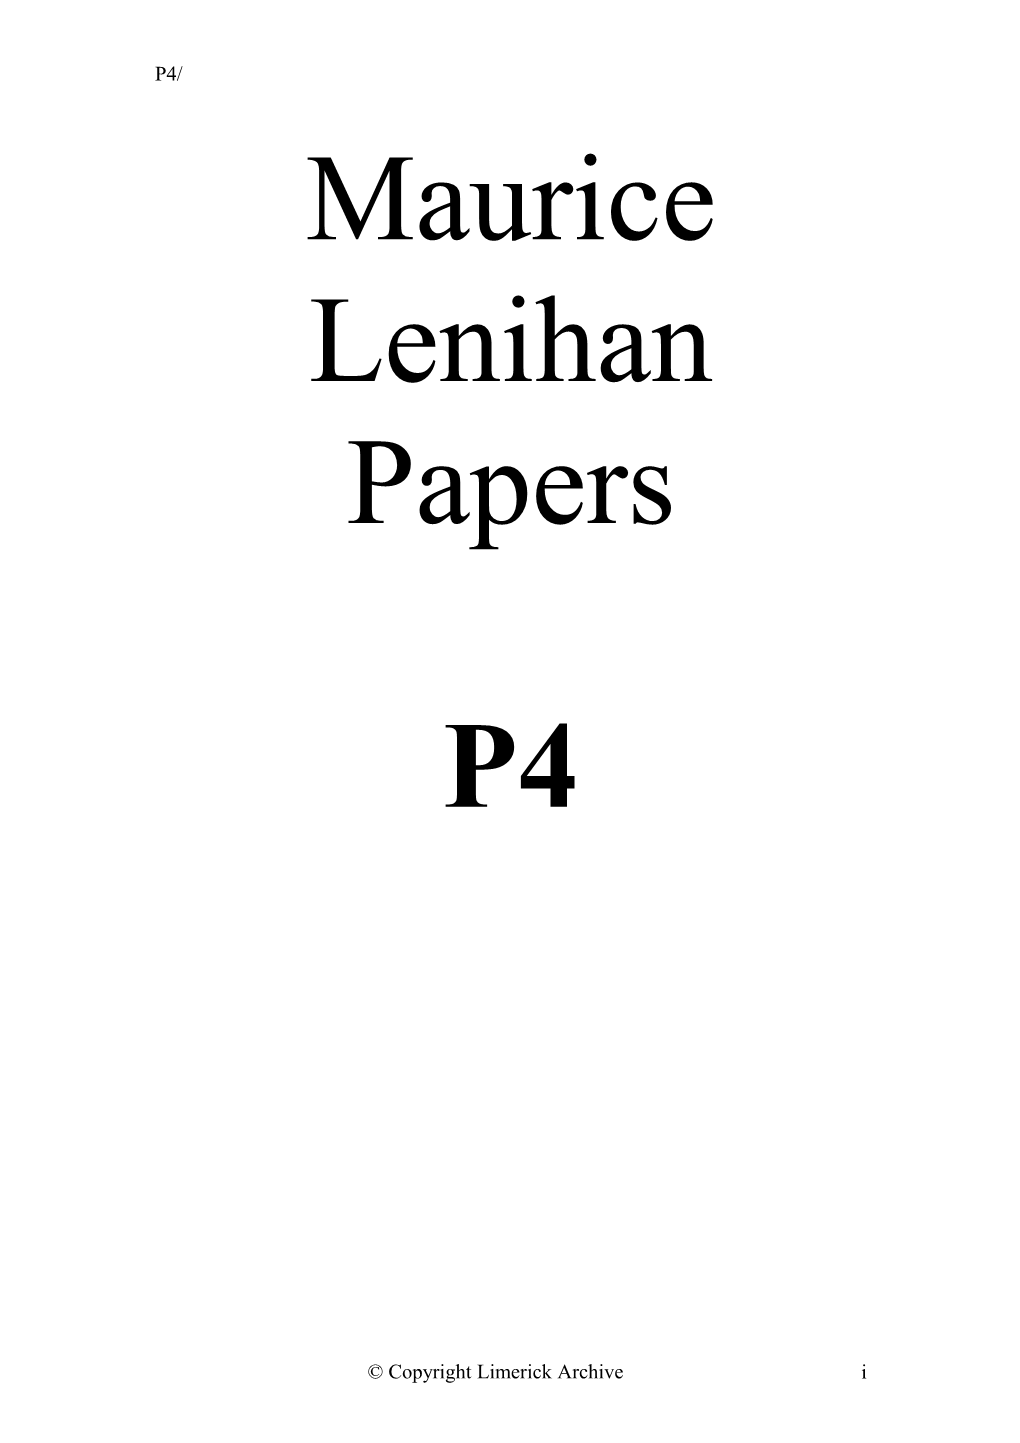 Maurice Lenihan Papers